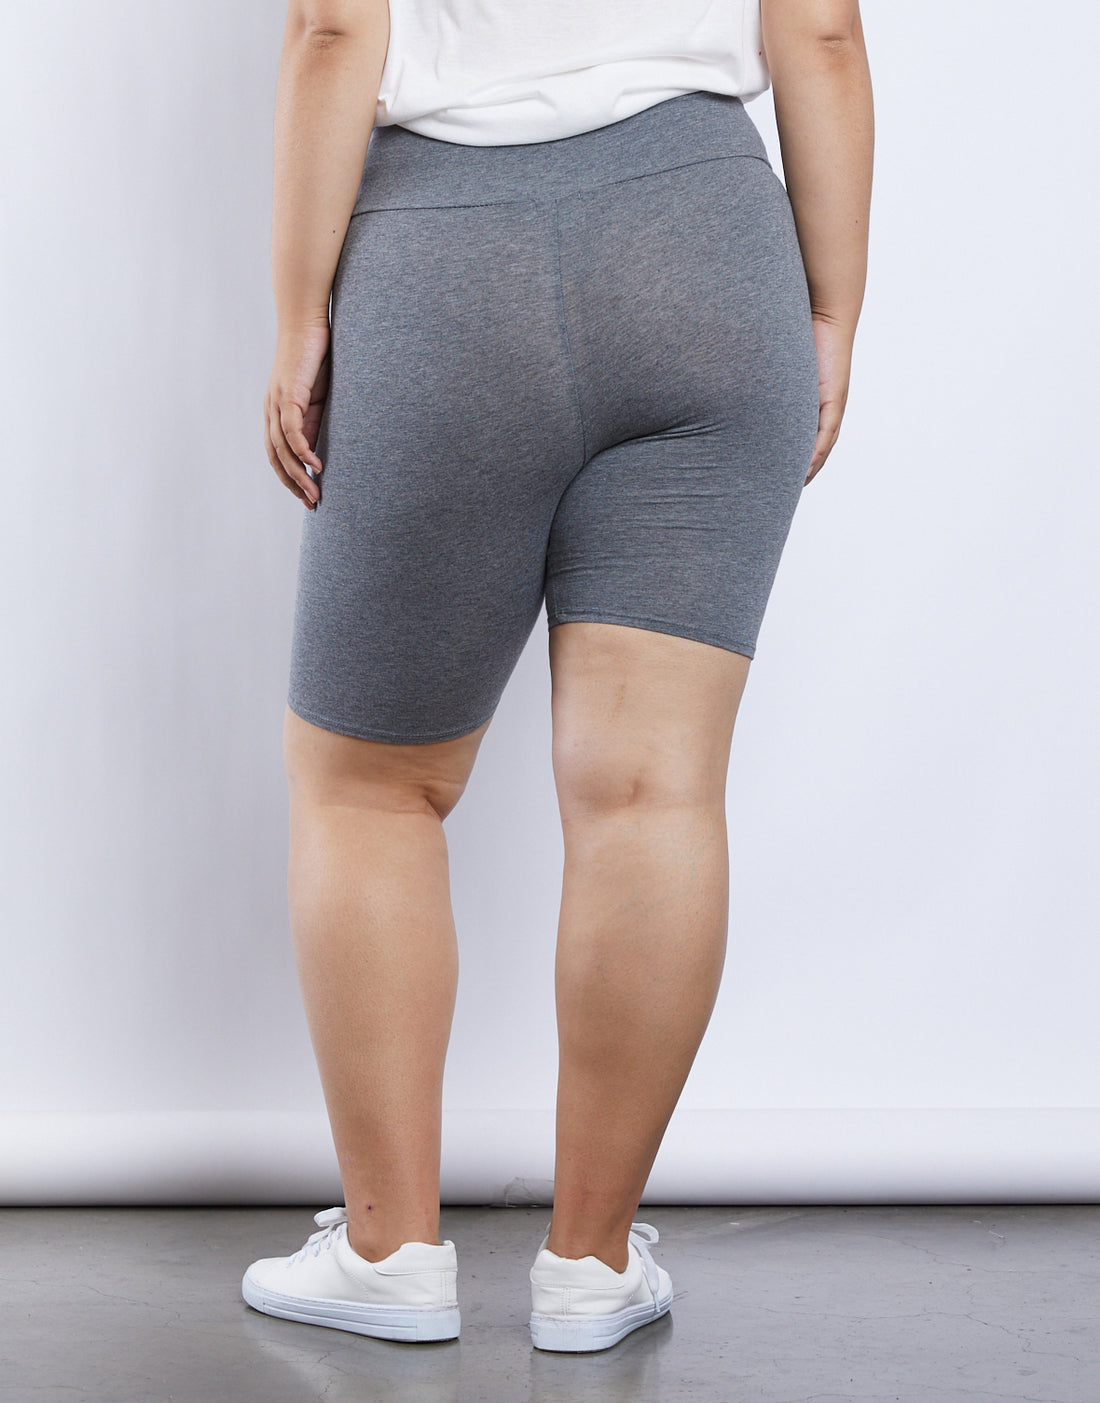 Curve Relax This Weekend Shorts Plus Size Bottoms -2020AVE